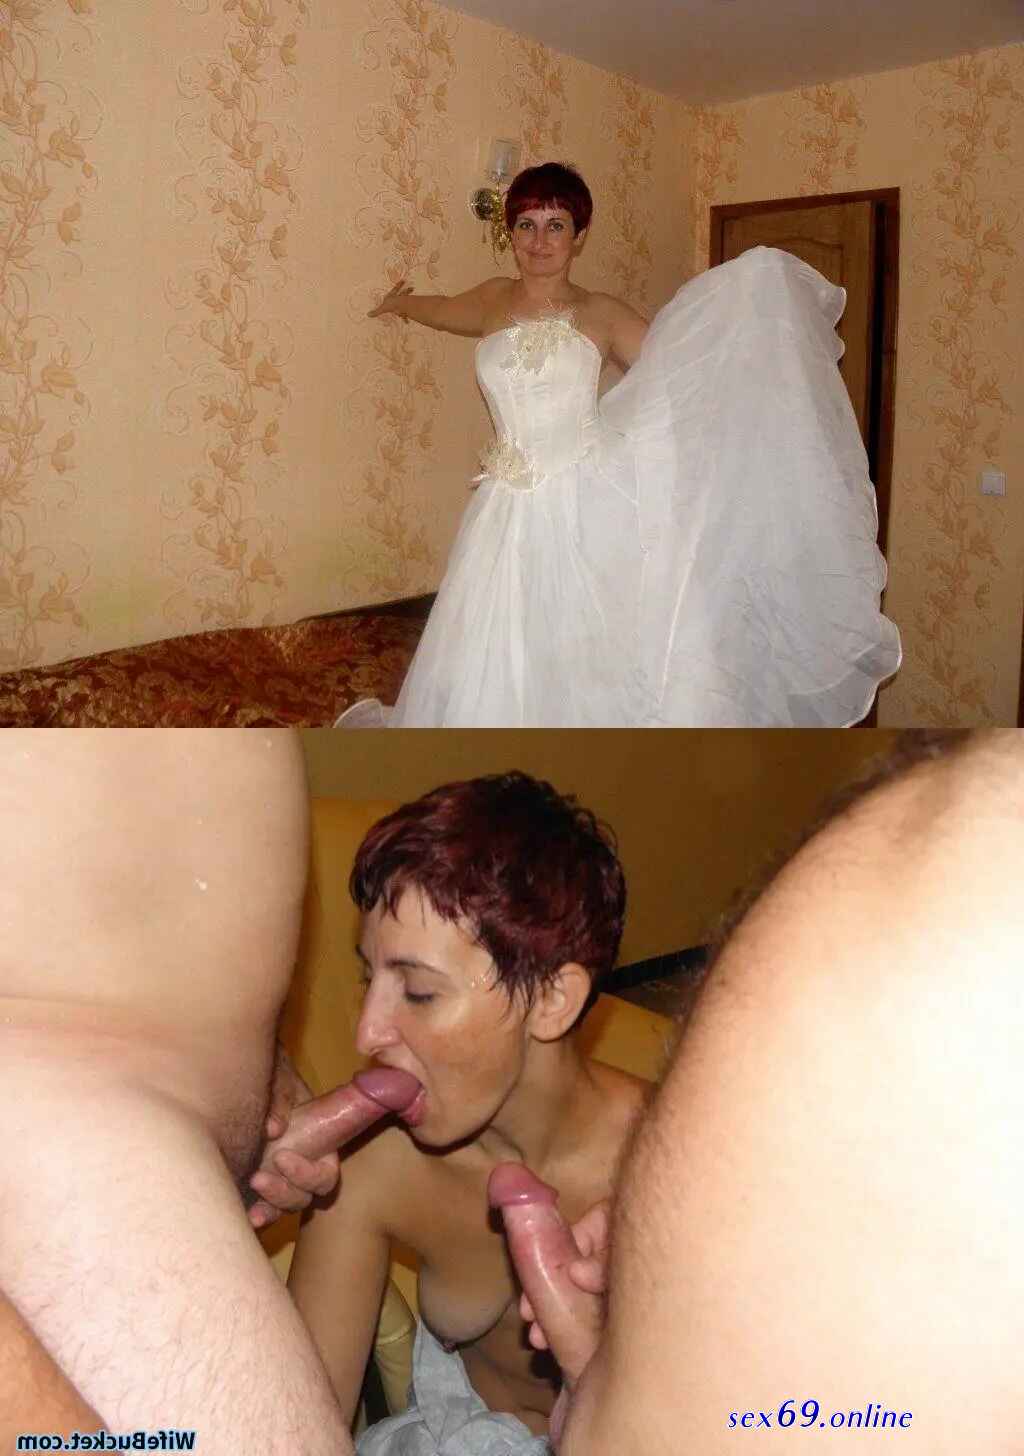 Bride Nude Before And After Sex - https://realestateswappers.com/galleries/honeymoon-bride-nude-before-and- after/ - Sexy photos